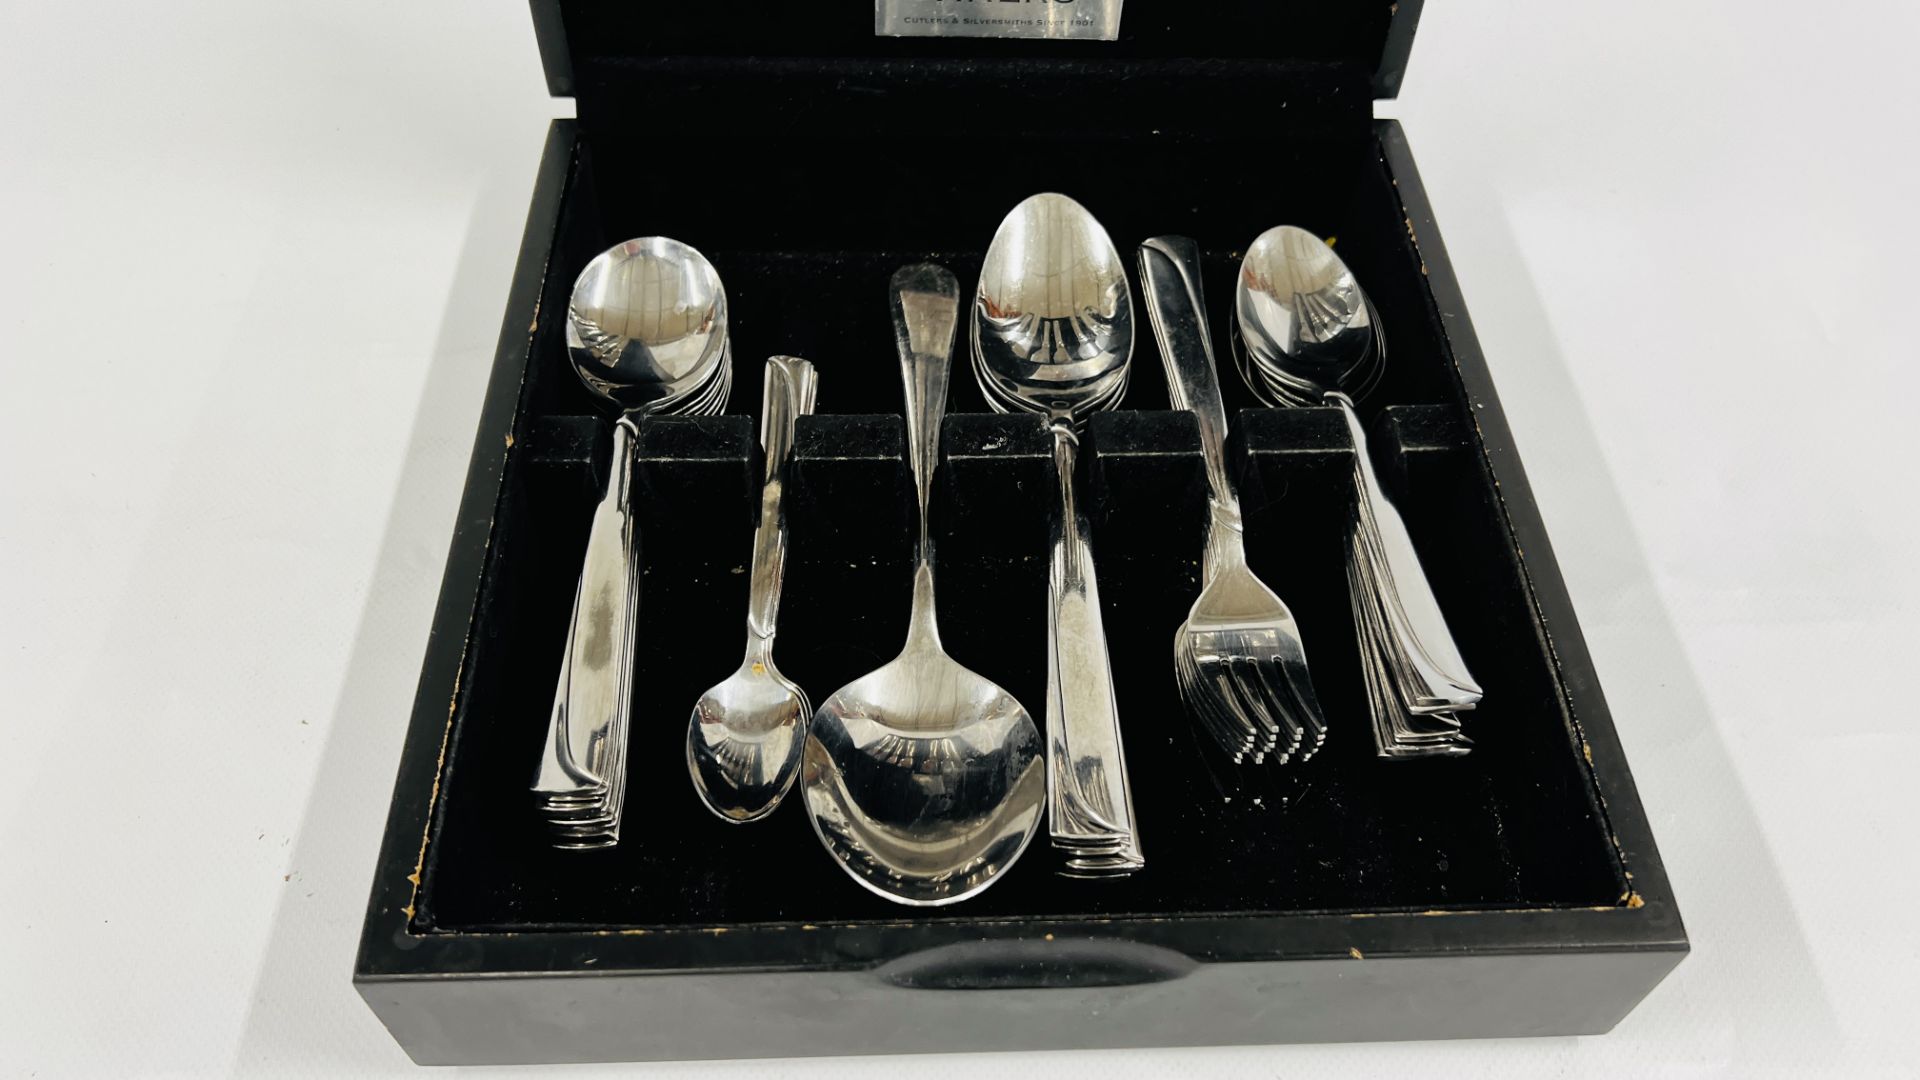 A PART CANTEEN OF VINERS STAINLESS STEEL CUTLERY - APPROX 39 PIECES. - Image 3 of 4